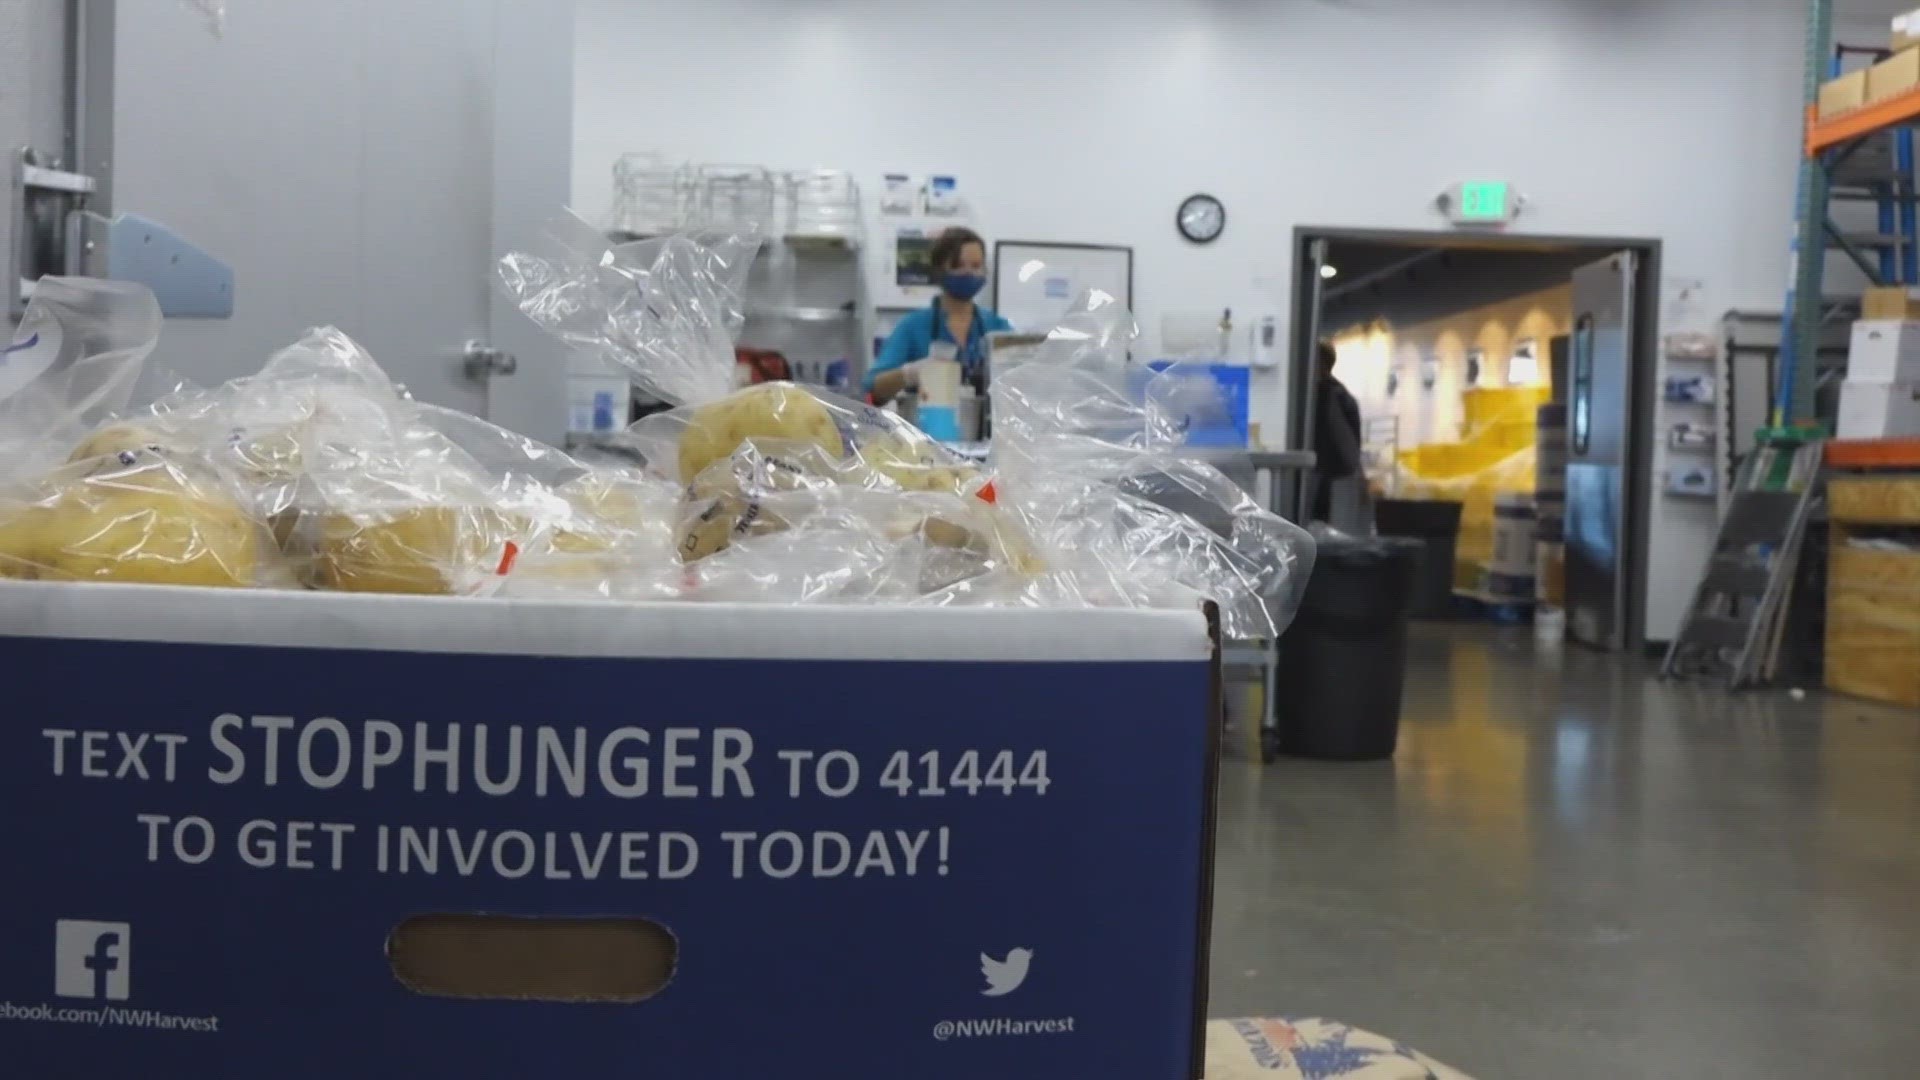 Over the past 22 years, the Home Team Harvest yearly food drive has helped raise more than 95 million meals.